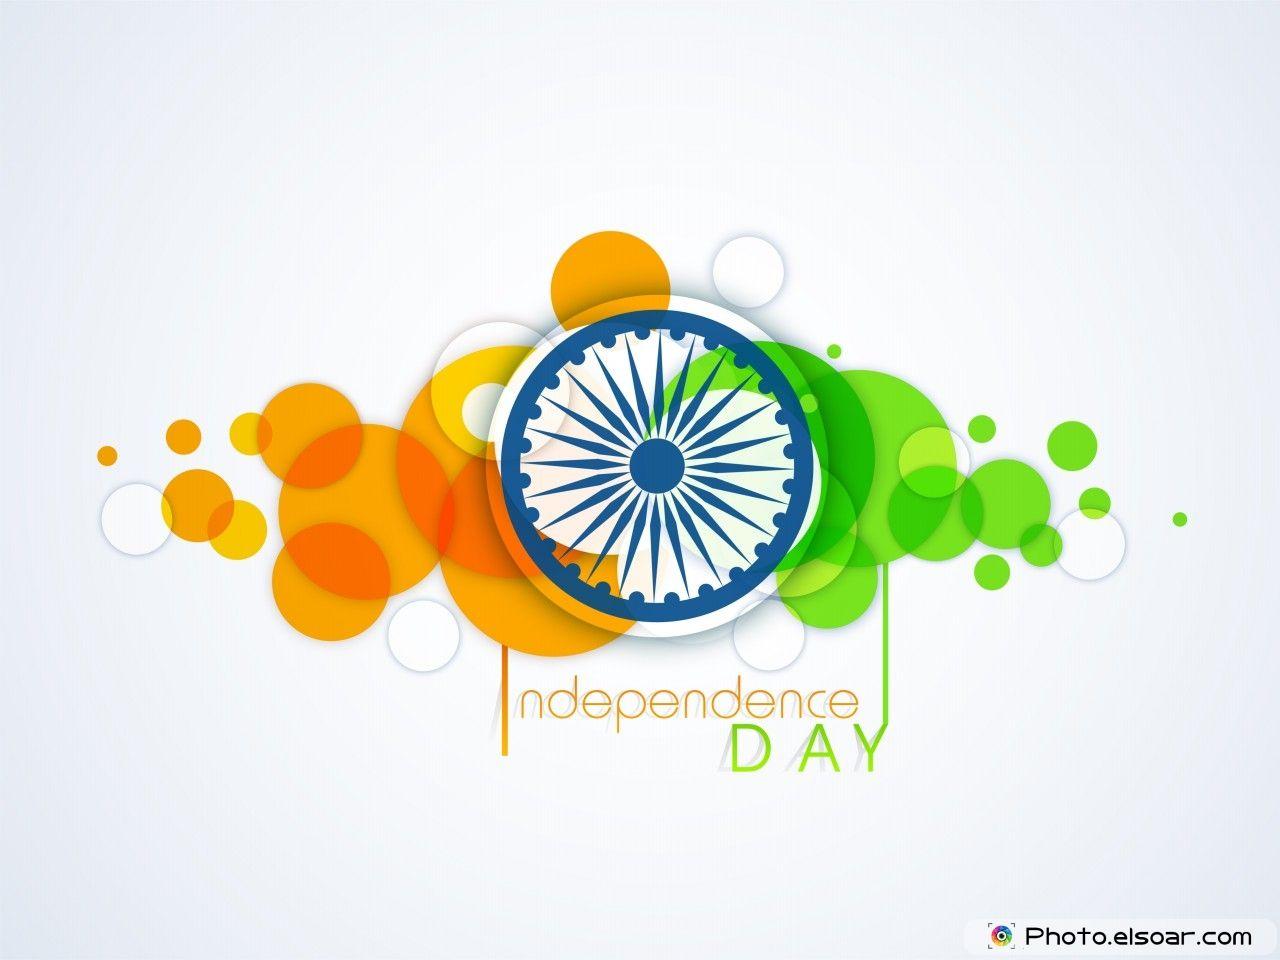 Happy Independence Day 2019 Wishes Images download Quotes Status HD  Wallpaper Messages SMS Photos GIF Pics Greetings Card Pictures Video  Download